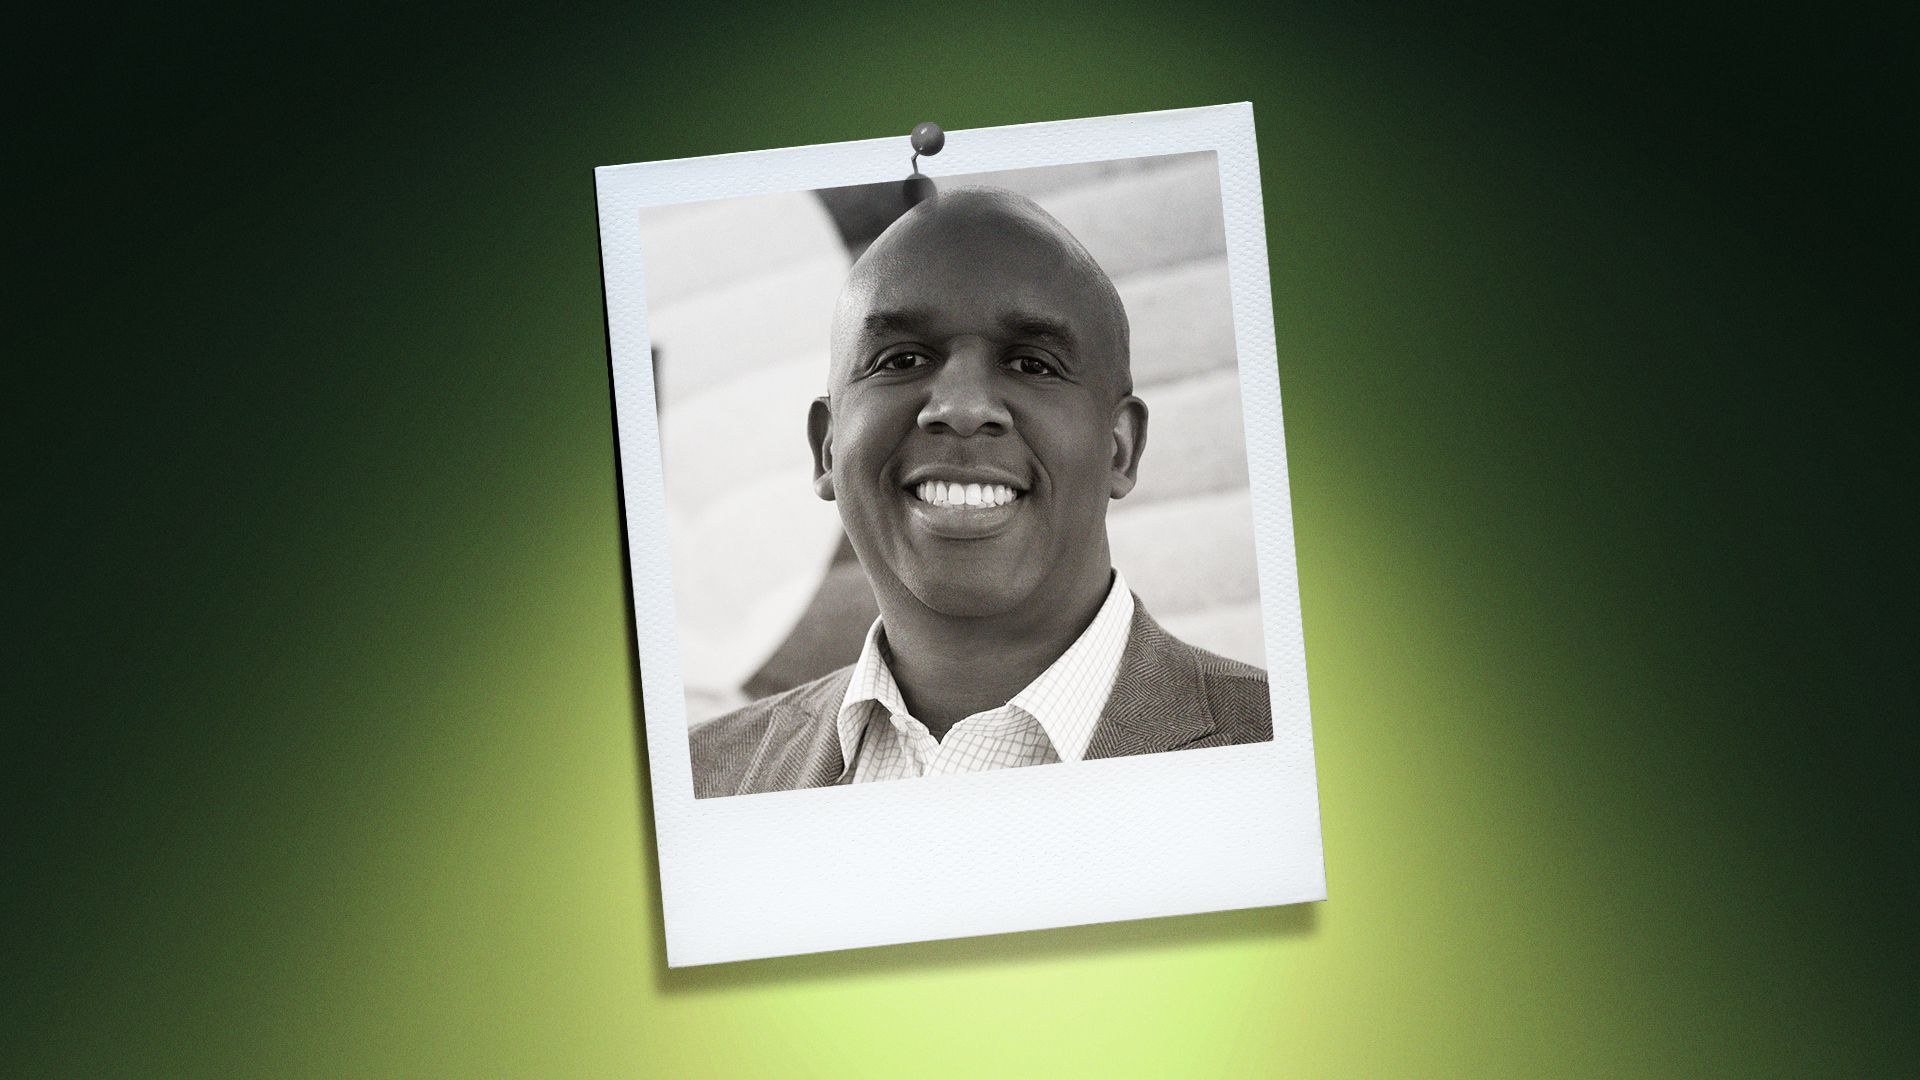 Photo illustration of Tim Humphrey, site lead of IBM's Research Triangle Park office, in the center of a Polaroid photo under a green spotlight.